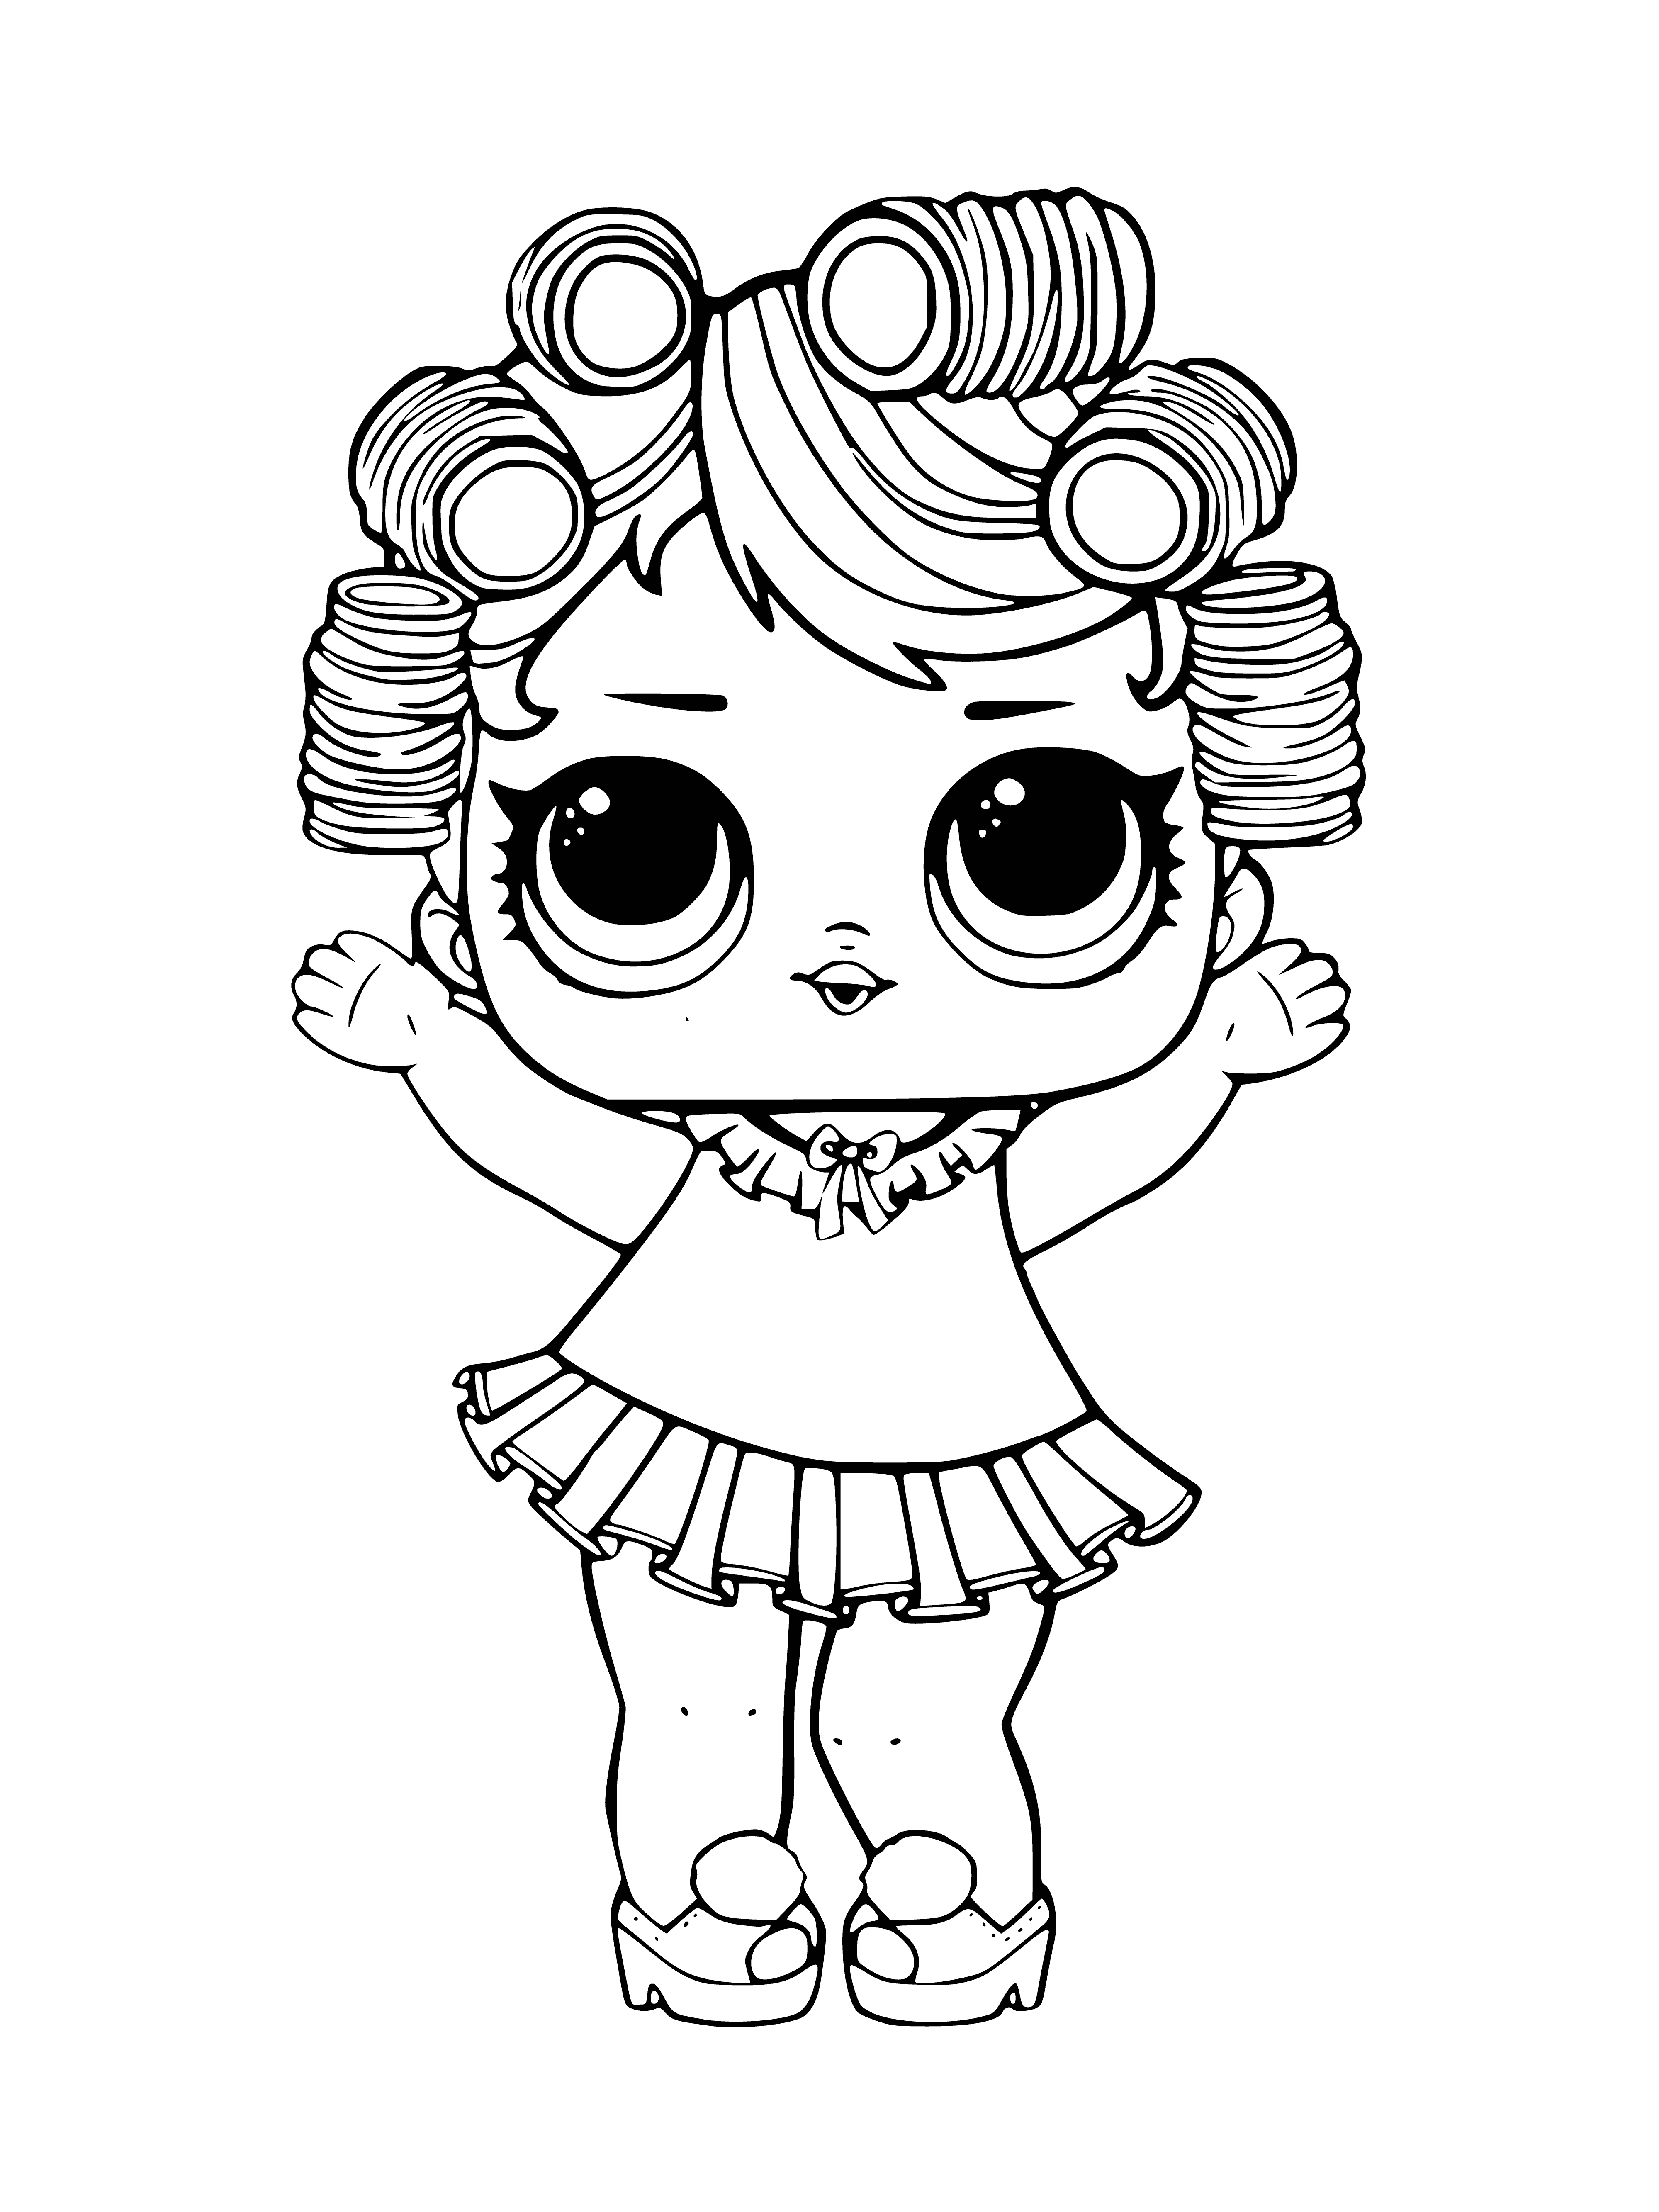 LOL BABY DOLL confetti pop doll coloring page